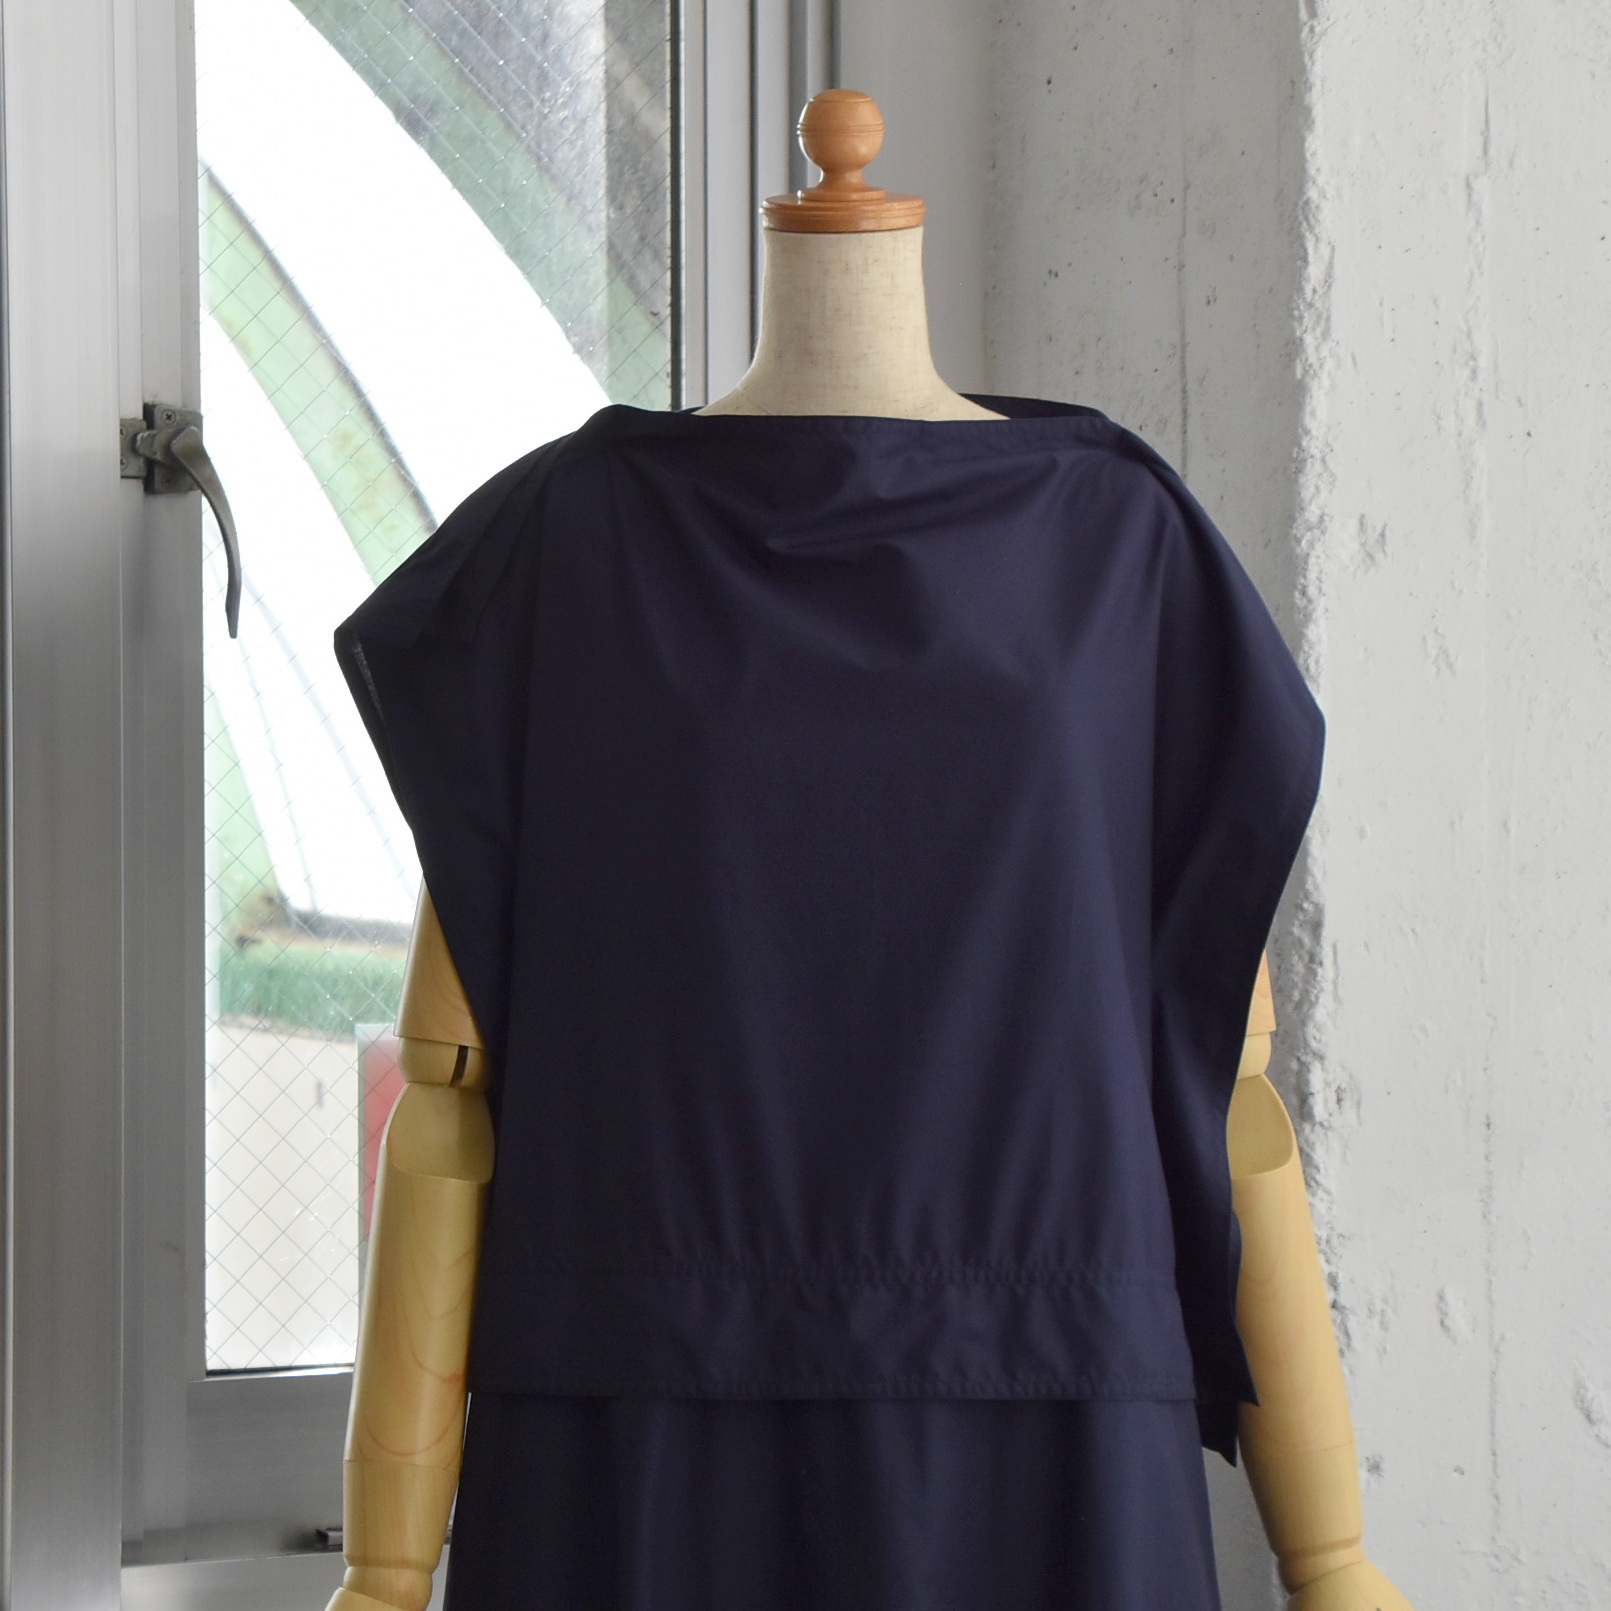 SOFIE D'HOORE(ソフィードール) / DARIA Dress with square top(6)